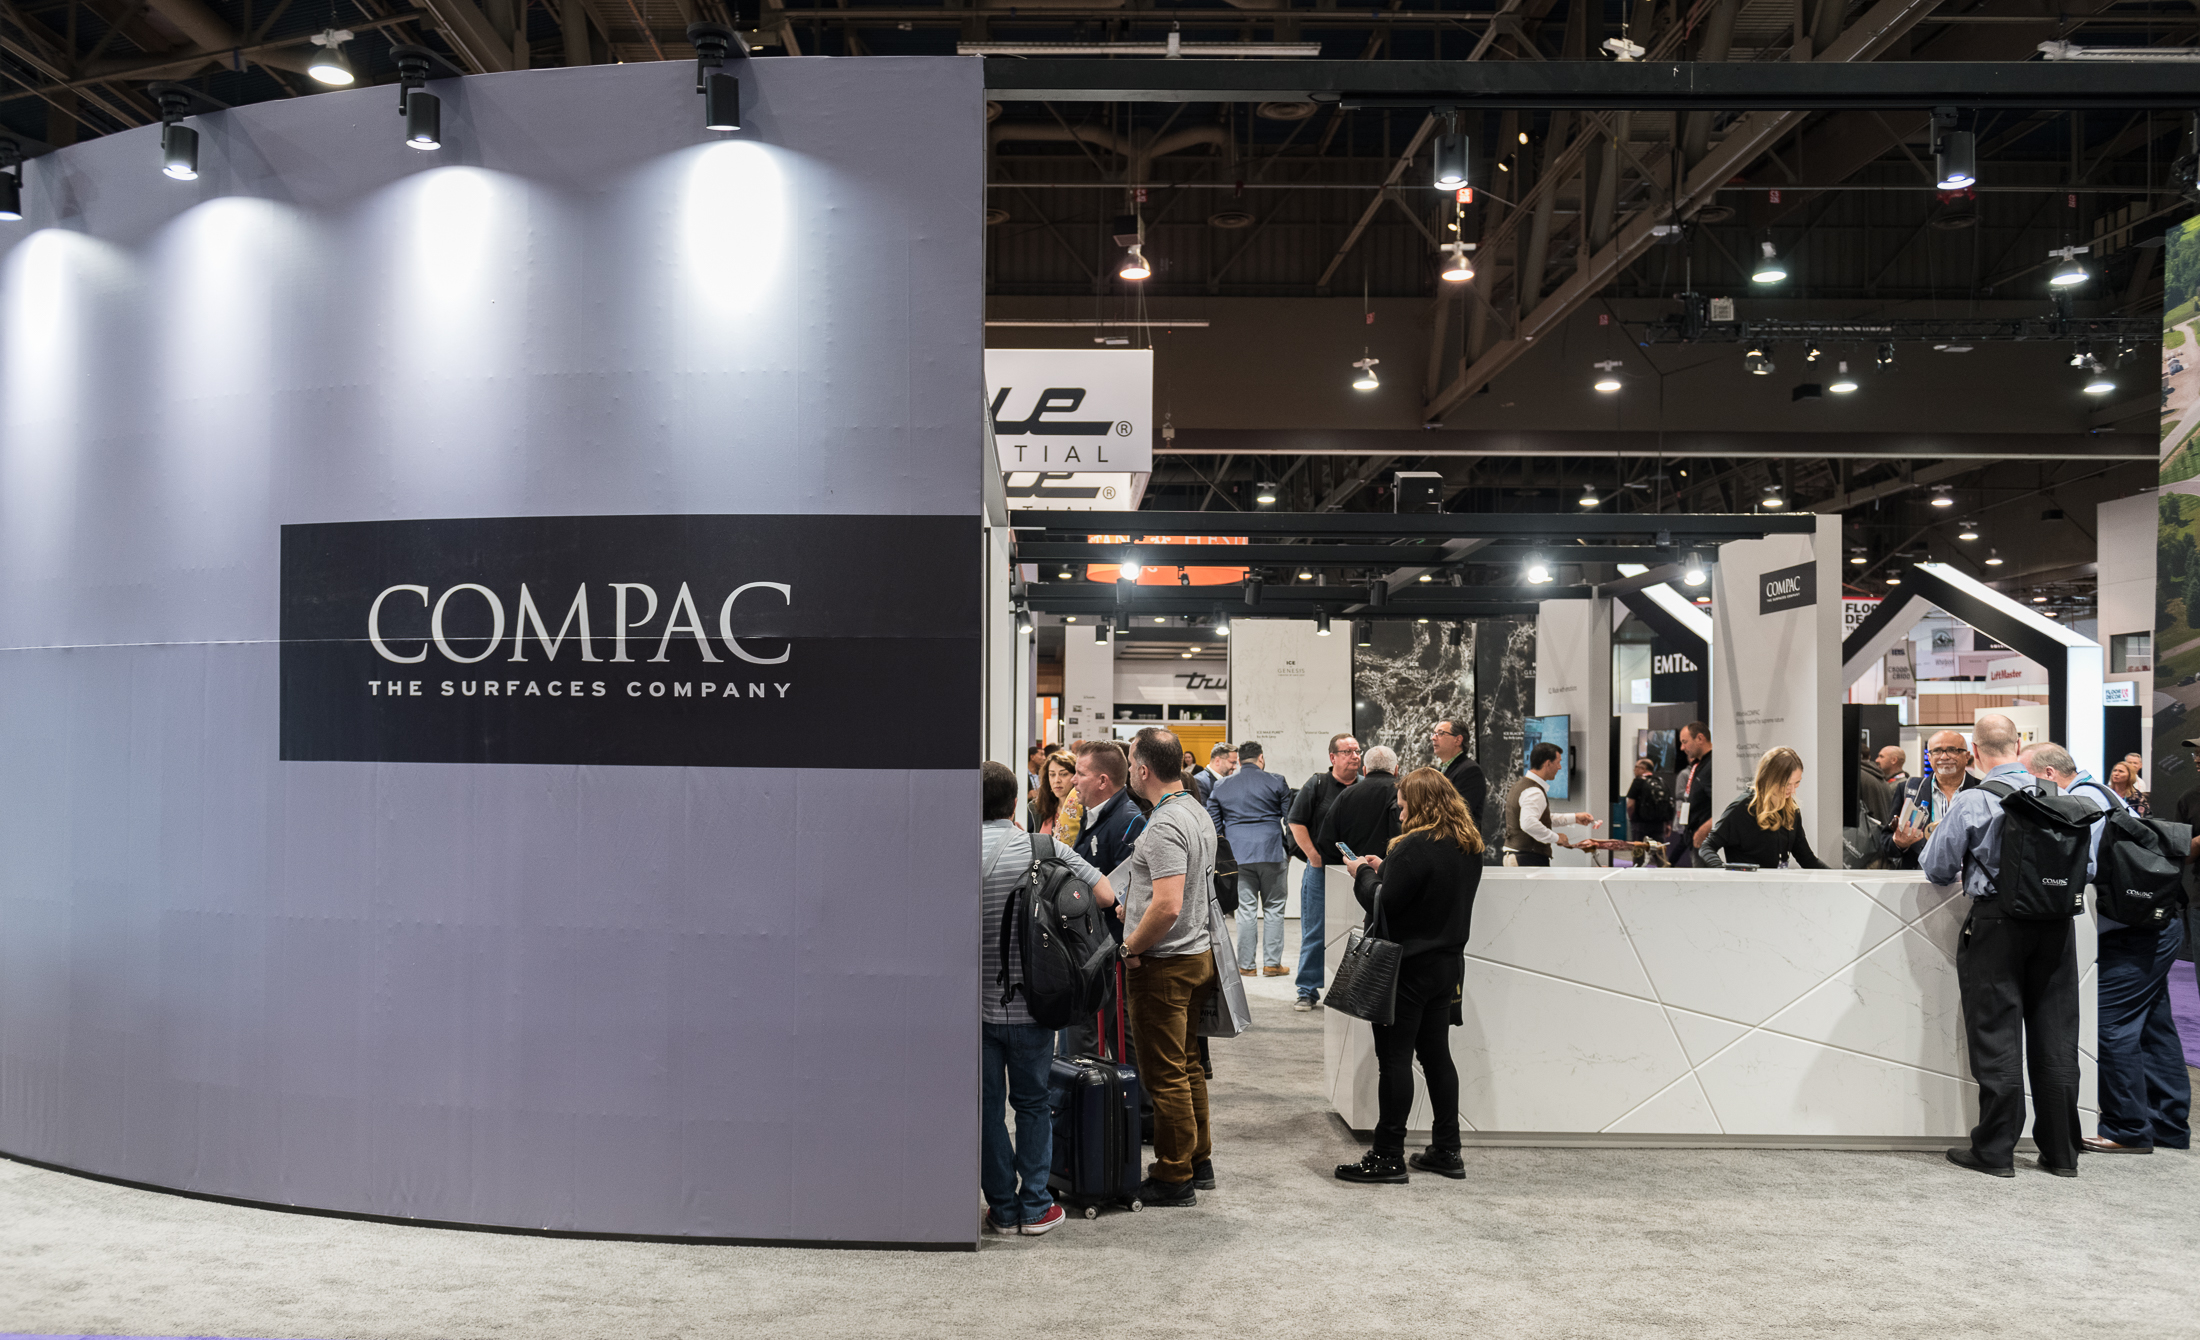 COMPAC’s Presence at KBIS 2020 Points to a Great Year Ahead